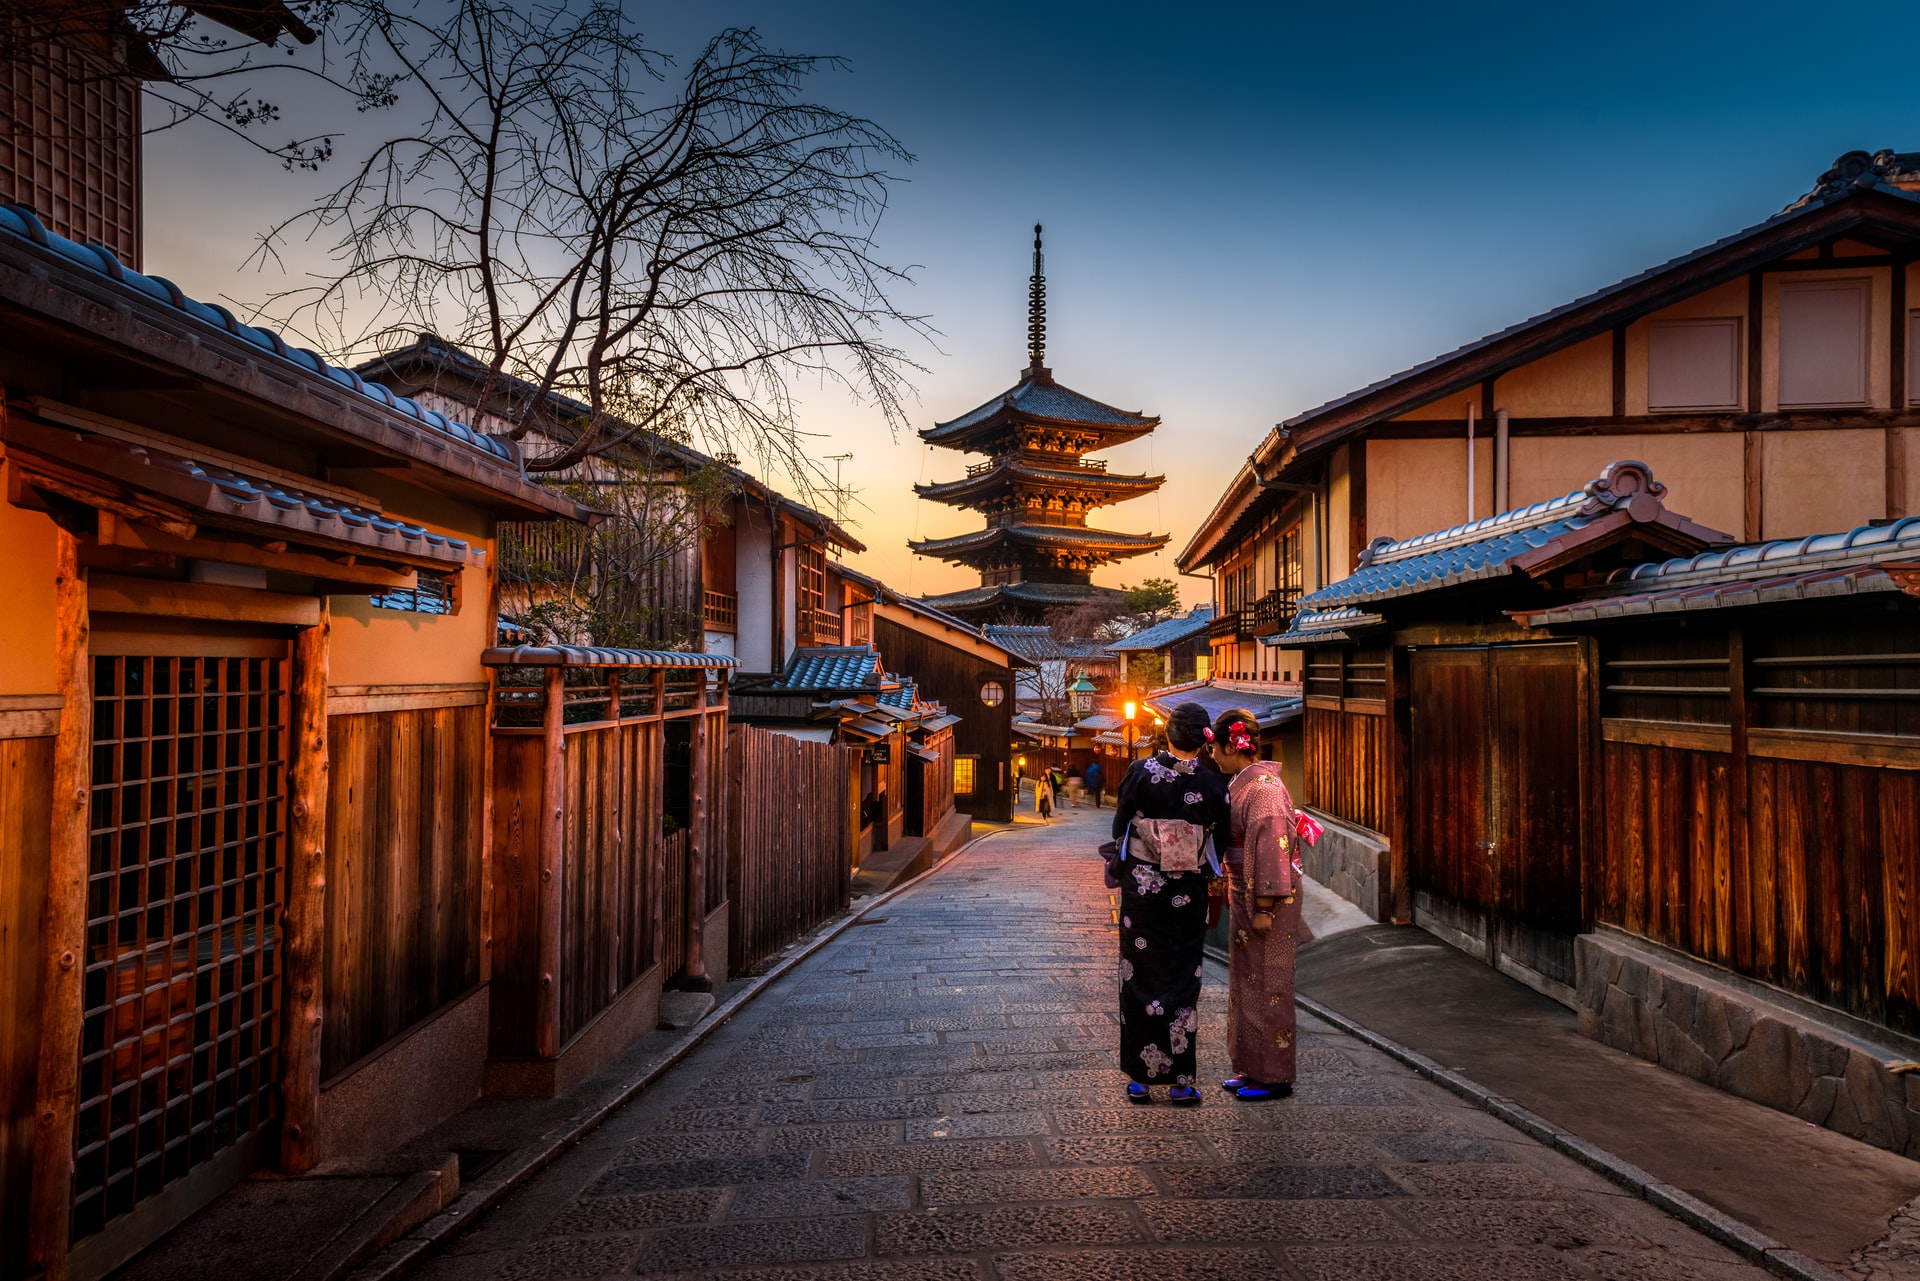 Spend A Day Exploring Japan Without Leaving Your Living Room